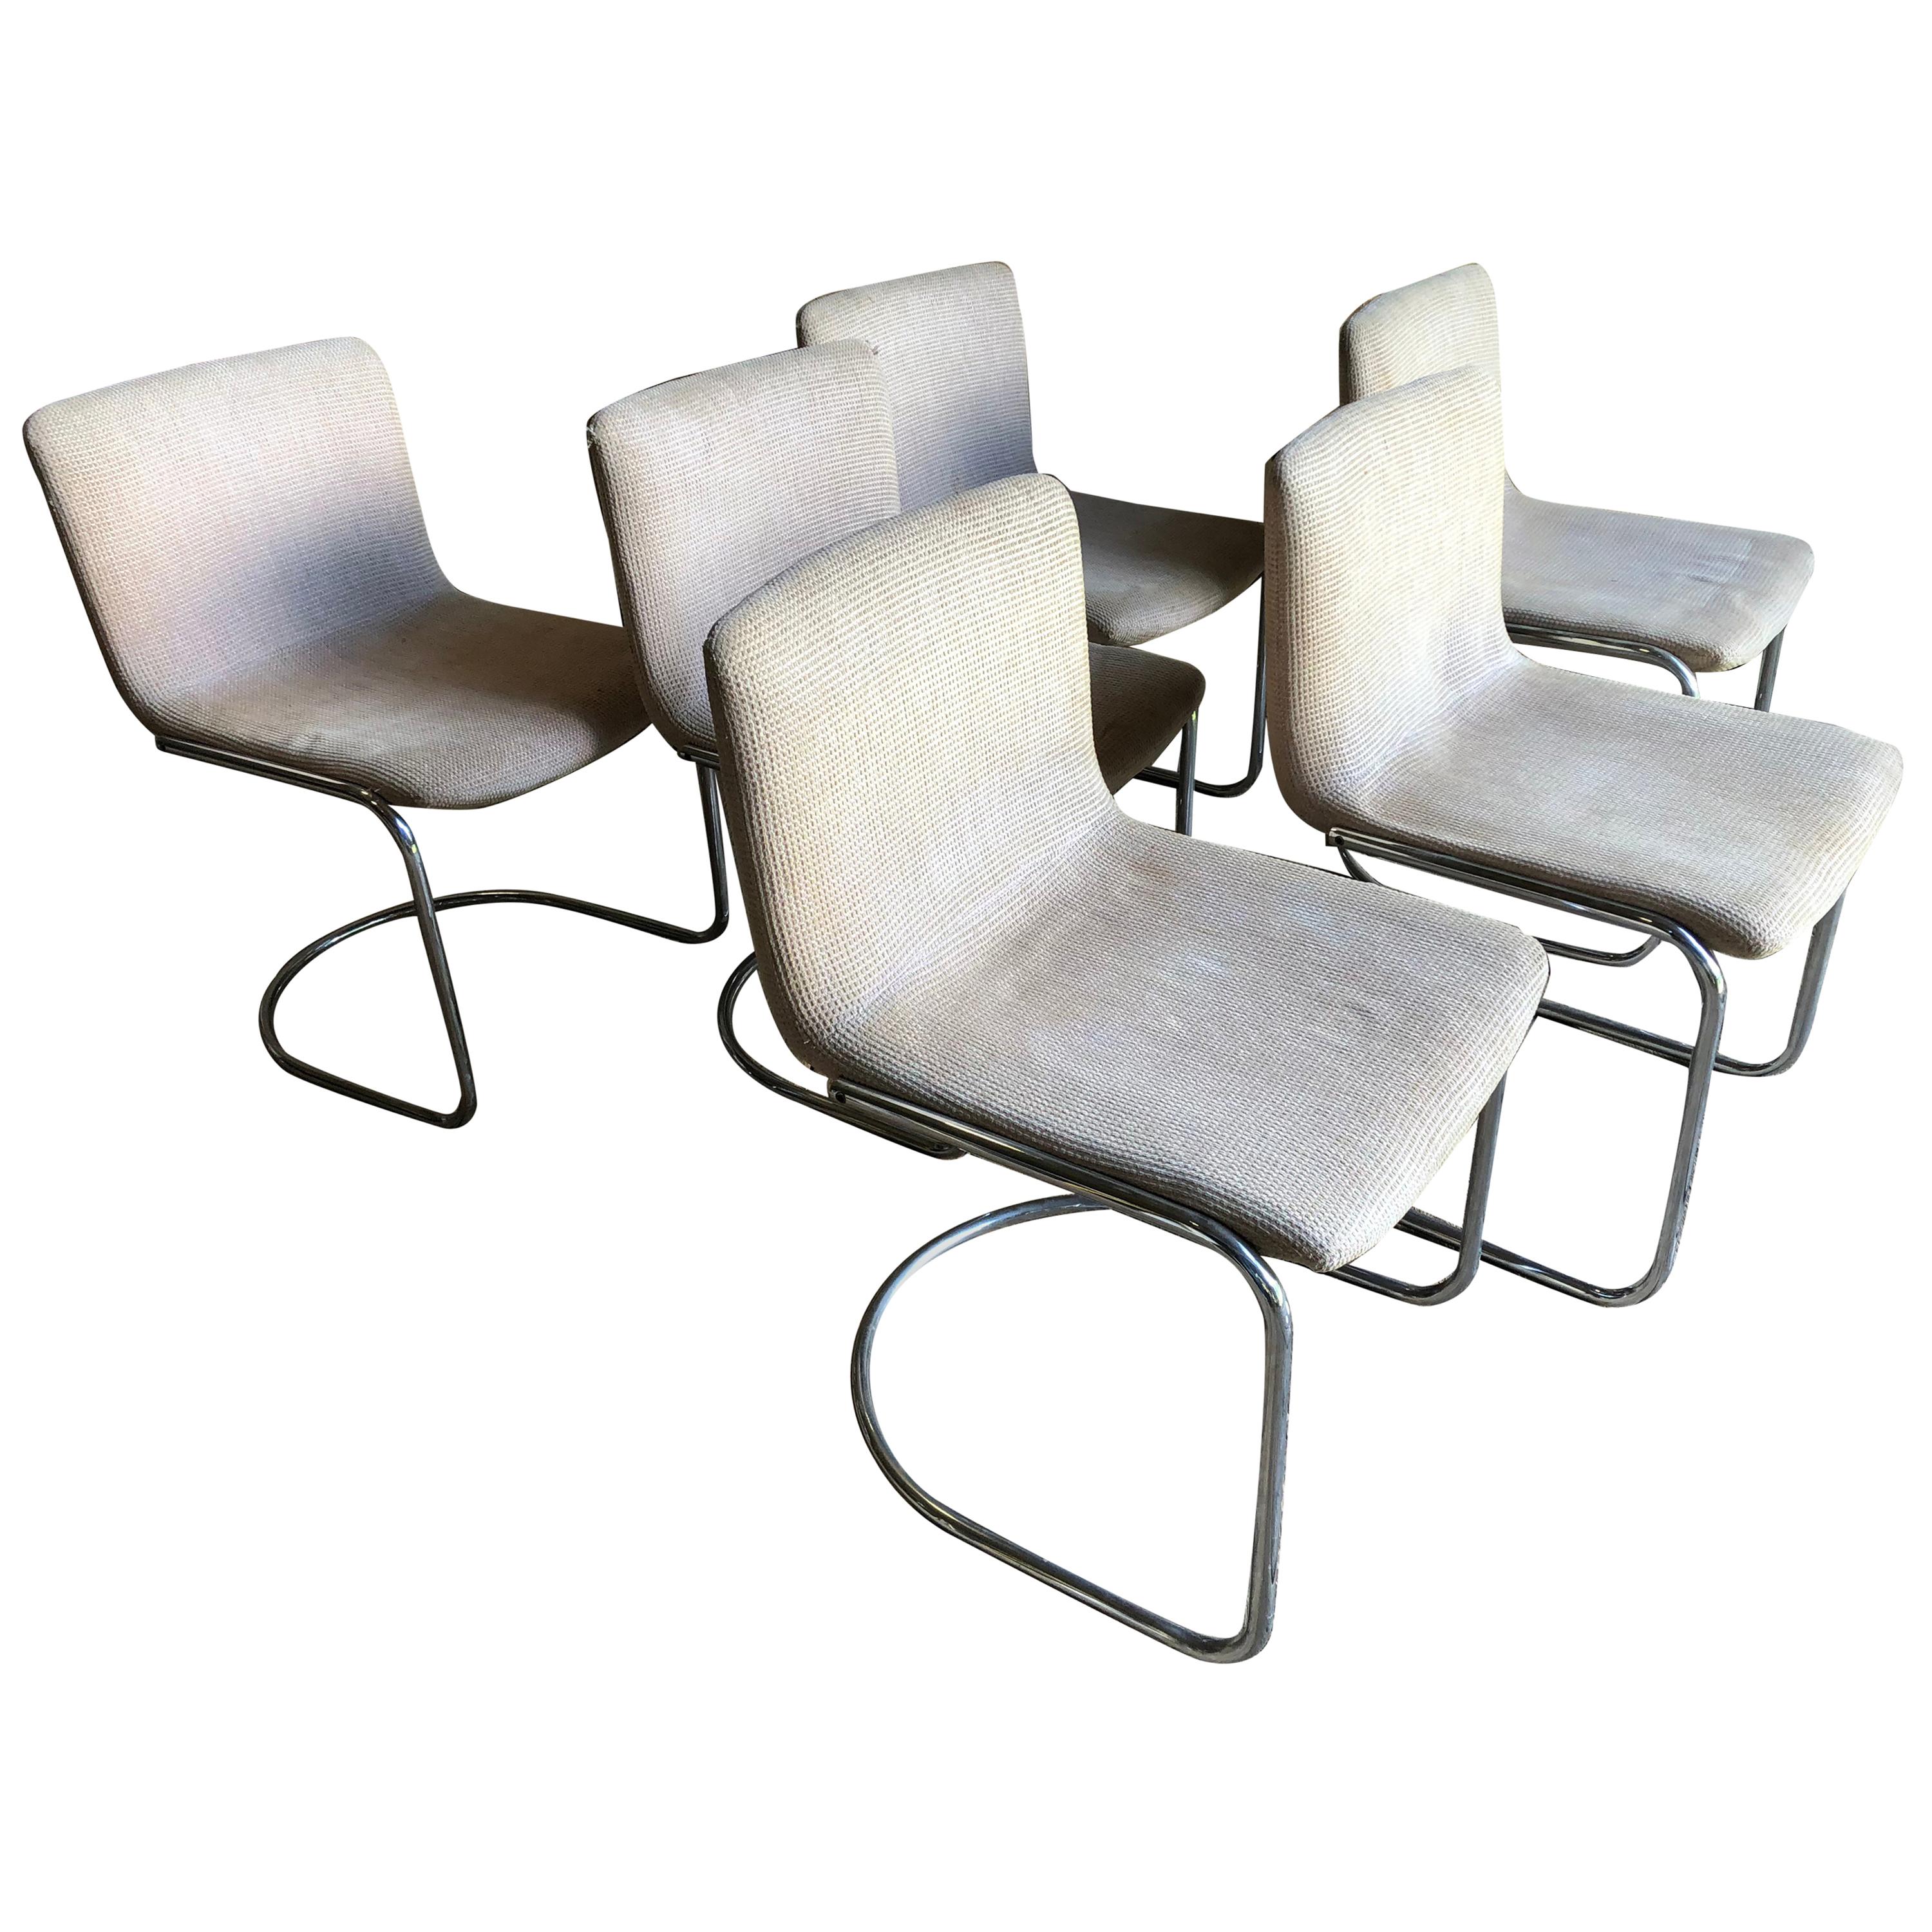 Set of 6 Modern Dining Chairs by Giovanni Offredi